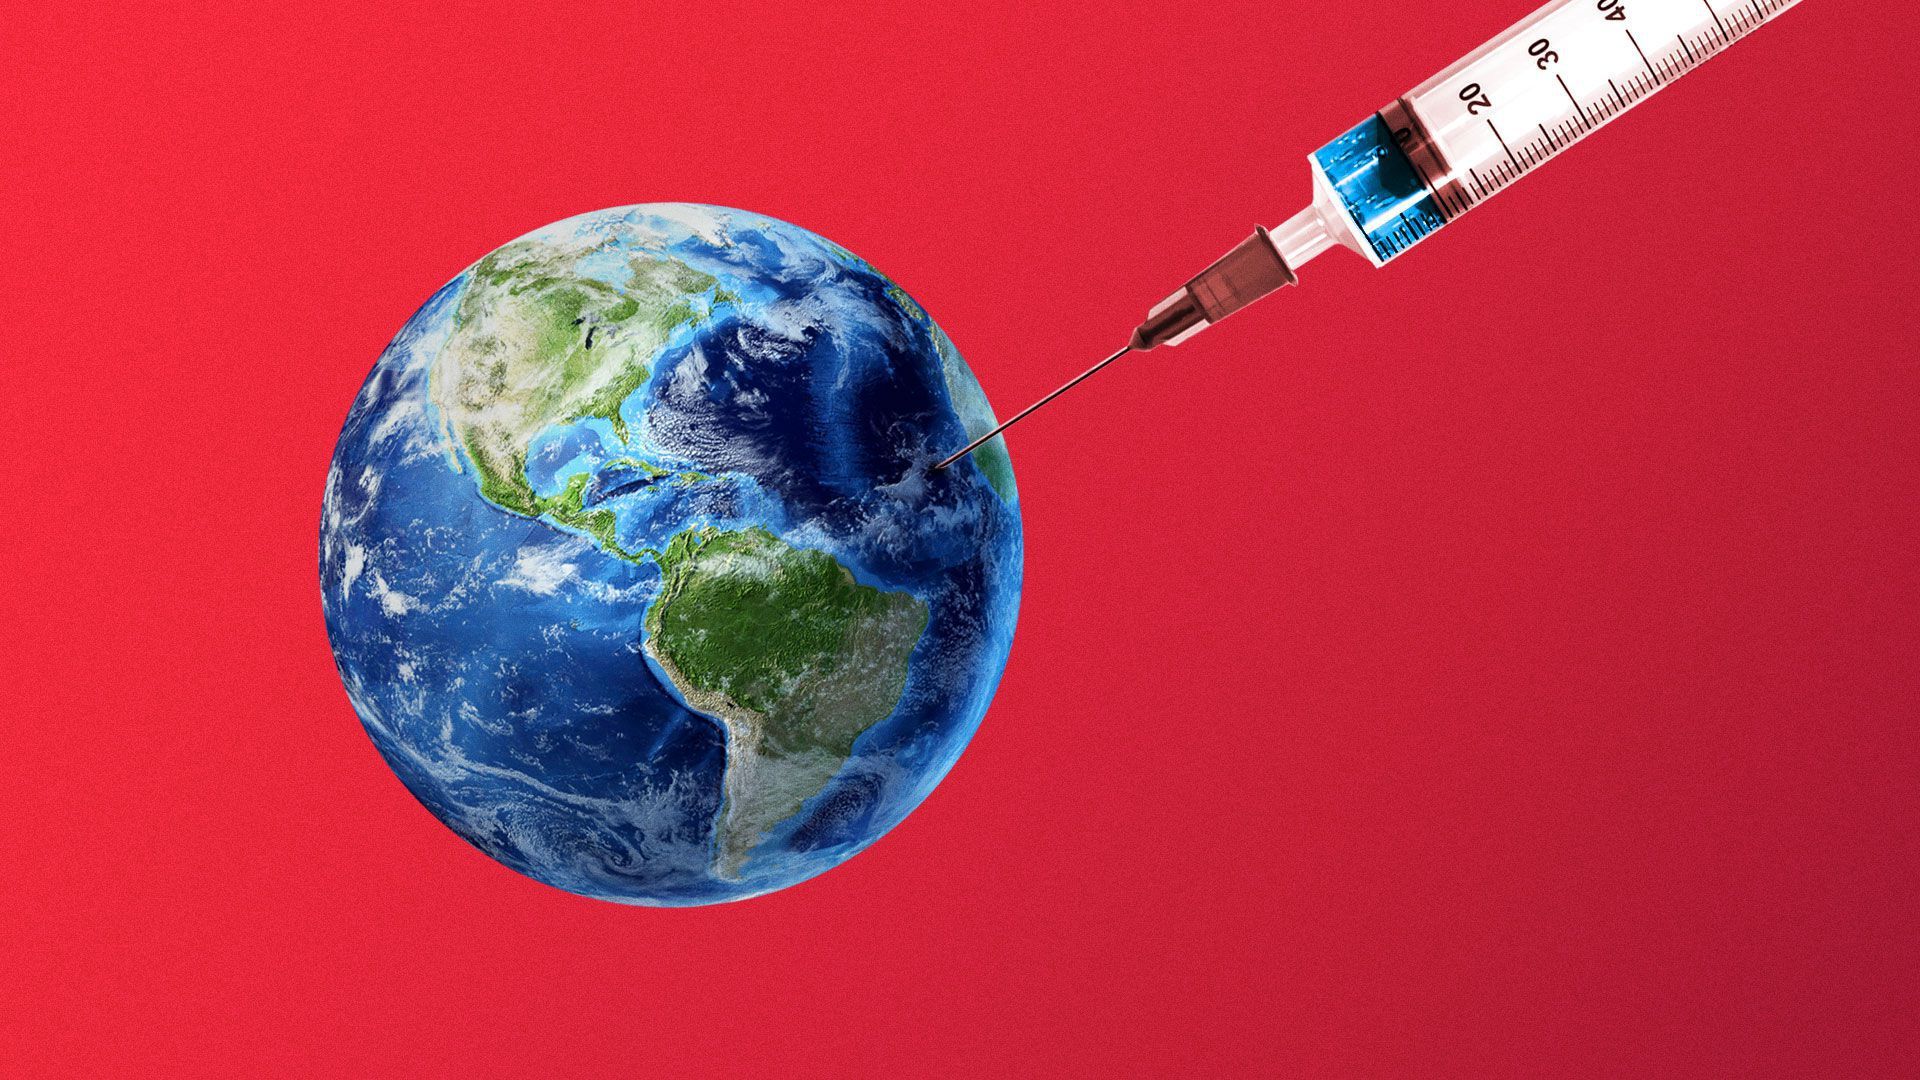 Illustration of the Earth with a needle stuck in it.